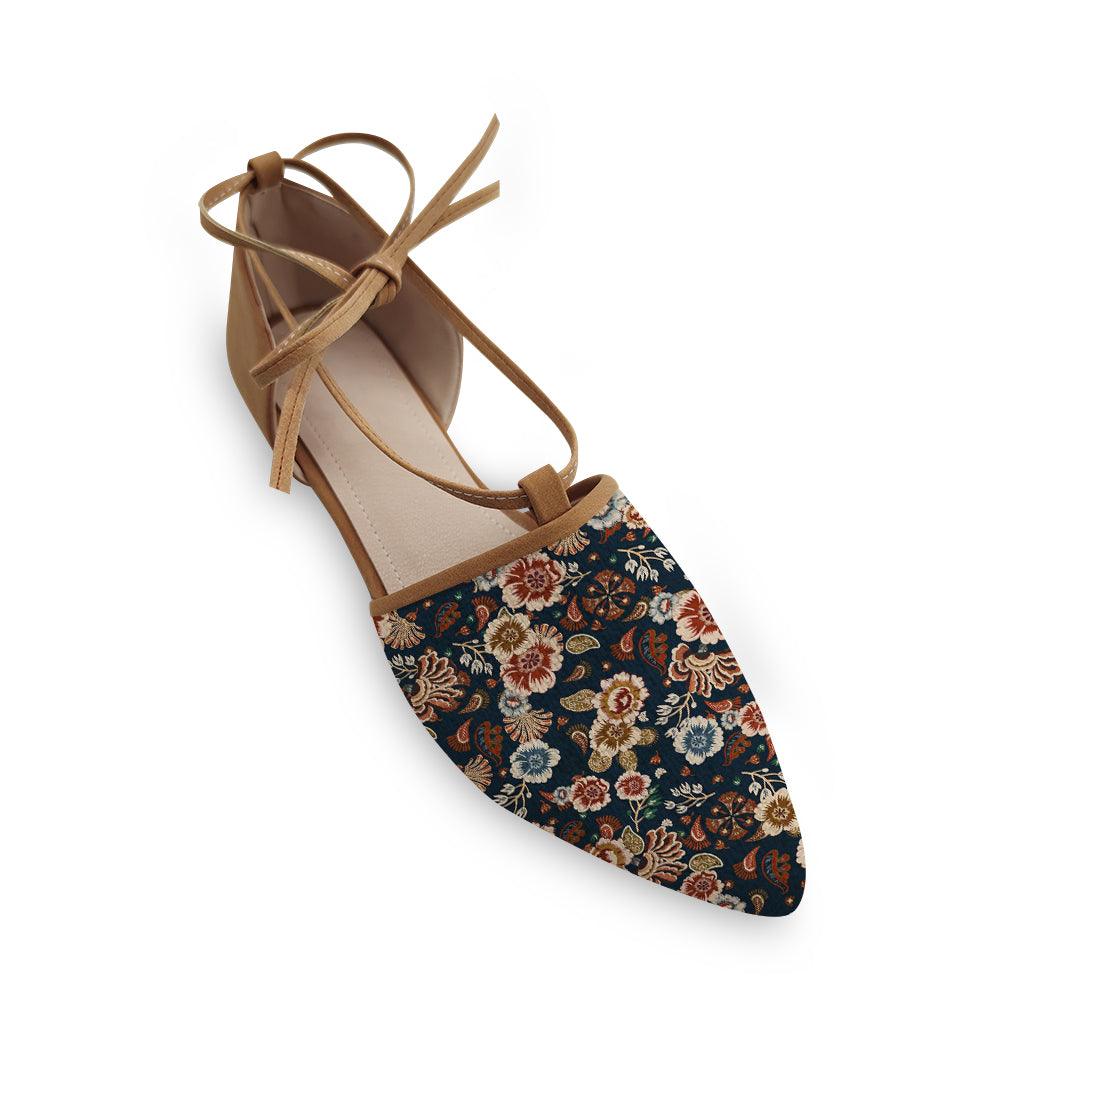 Rope tie Sandal continuo floral - CANVAEGYPT